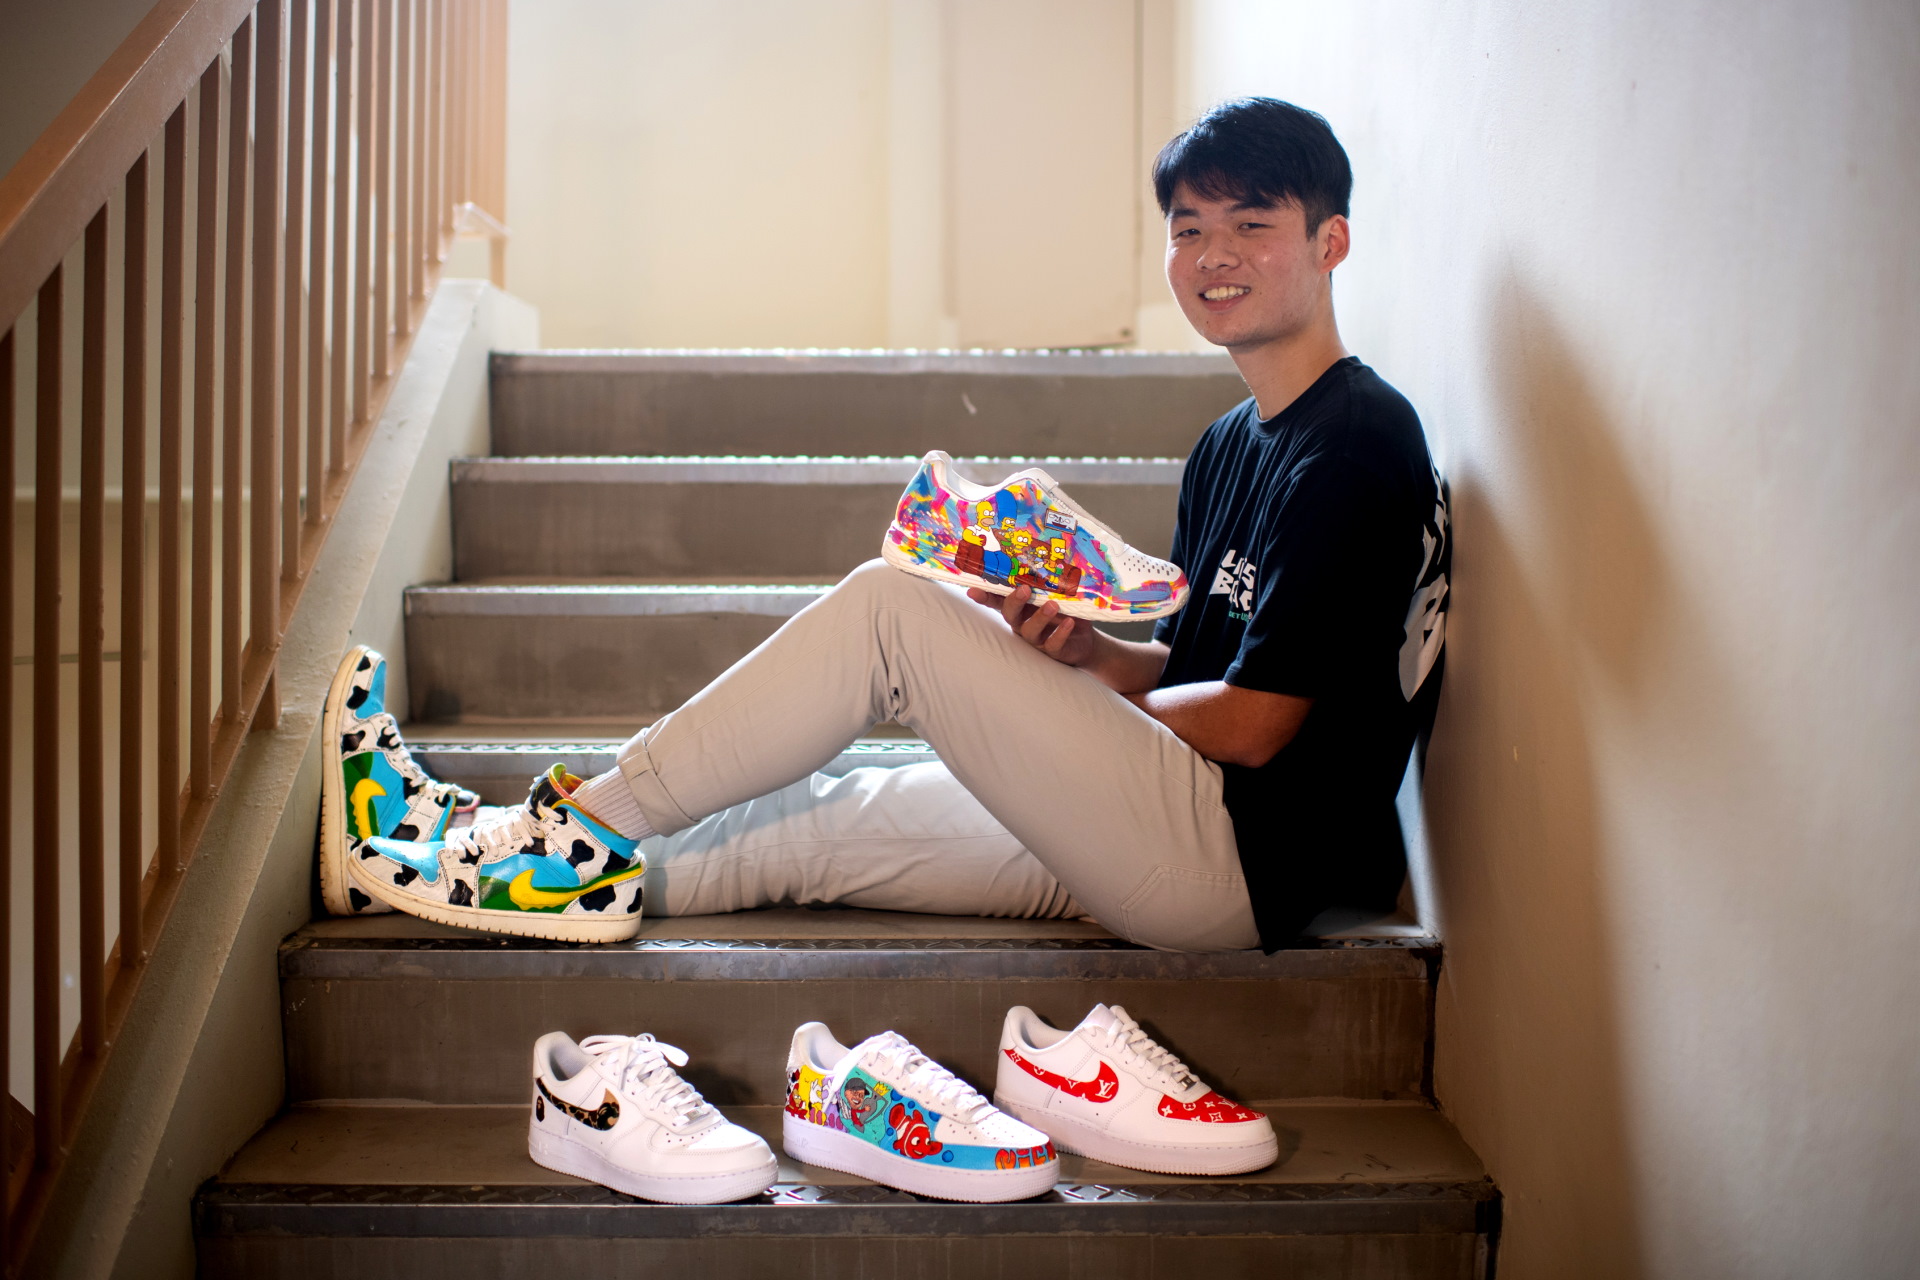 Self-Taught Sneaker Artist Turns Hobby Into Successful Home Business